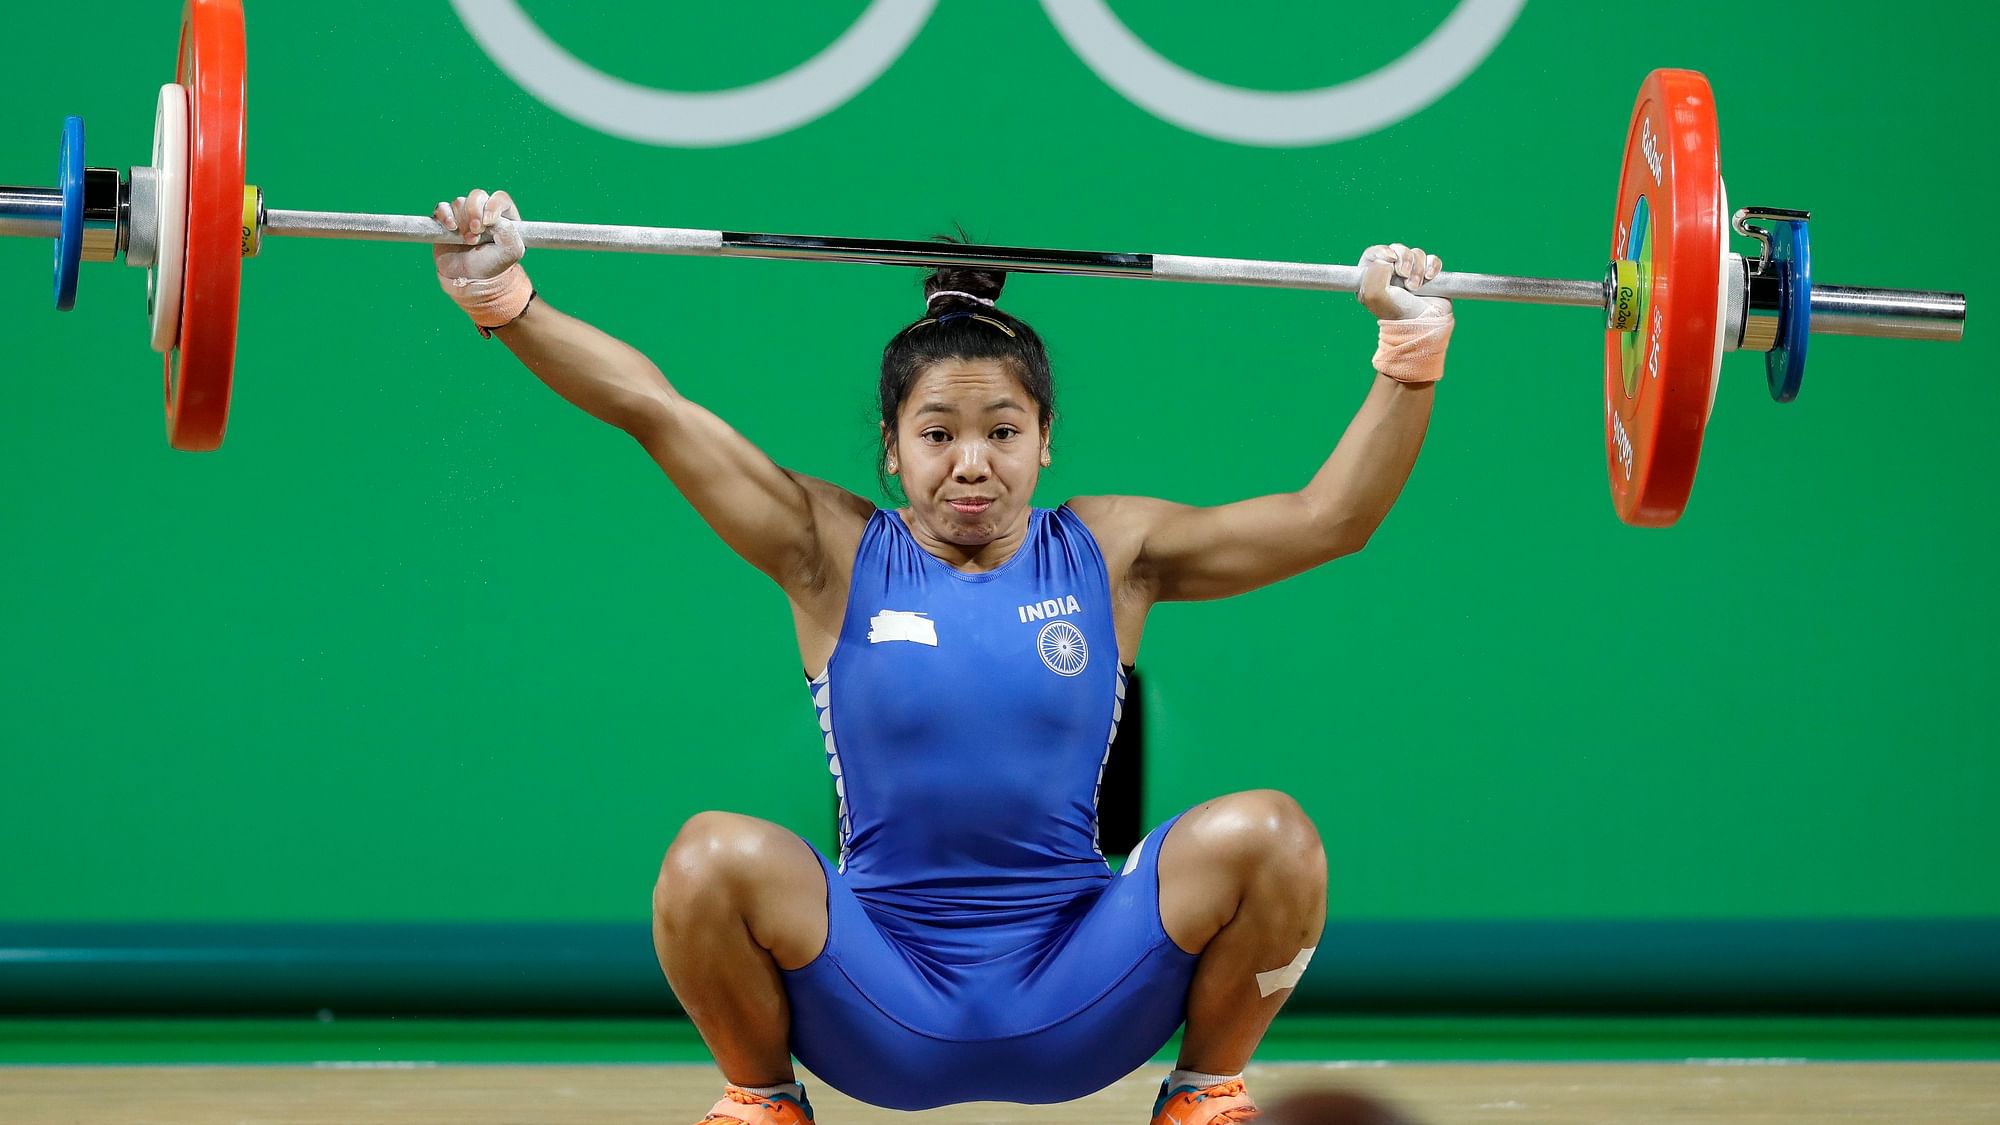 India’s only Olympic medal hopeful weightlifter, Mirabai Chanu’s main aim is to stay injury-free in the build-up to the final round of the qualifications in April where she targets to lift a personal best of 210 kilograms.